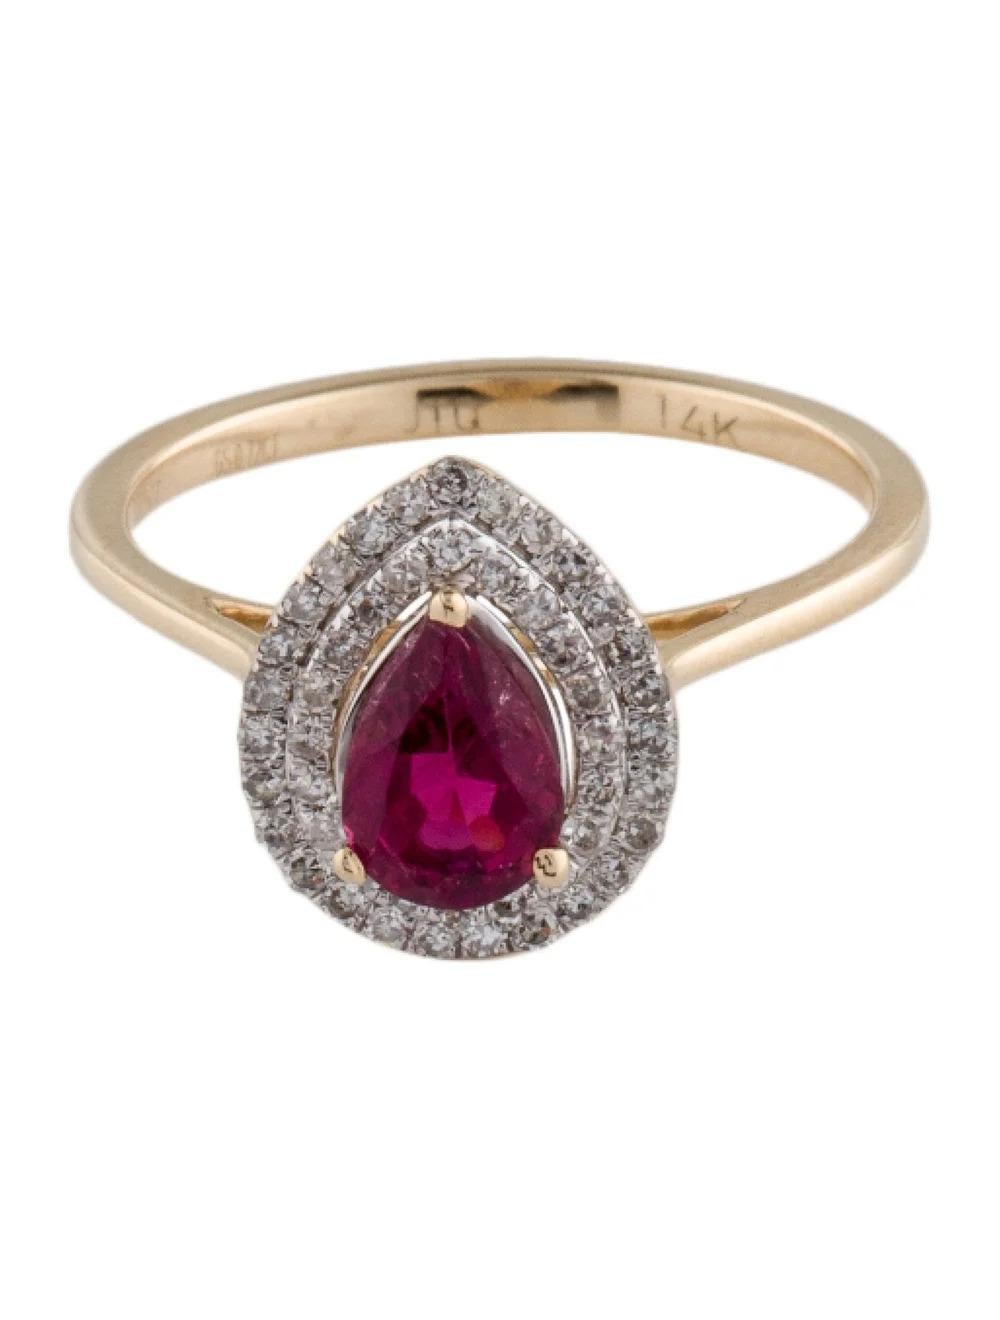 Pear Cut 14K Tourmaline & Diamond Cocktail Ring Size 6.25 - Stunning Statement Jewelry For Sale